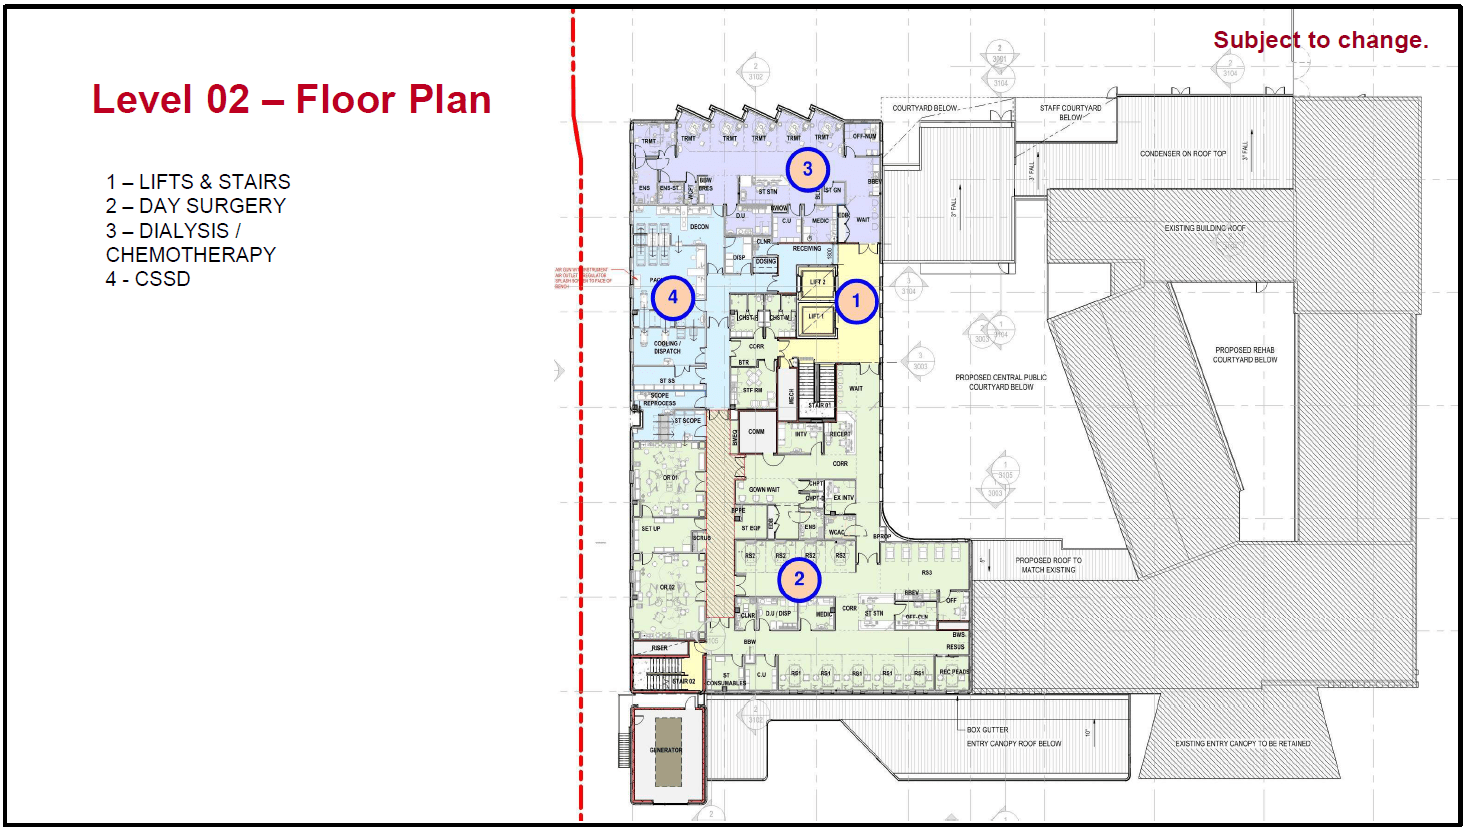 A floor plan showing Level Two of the Phillip Island Community Hospital.